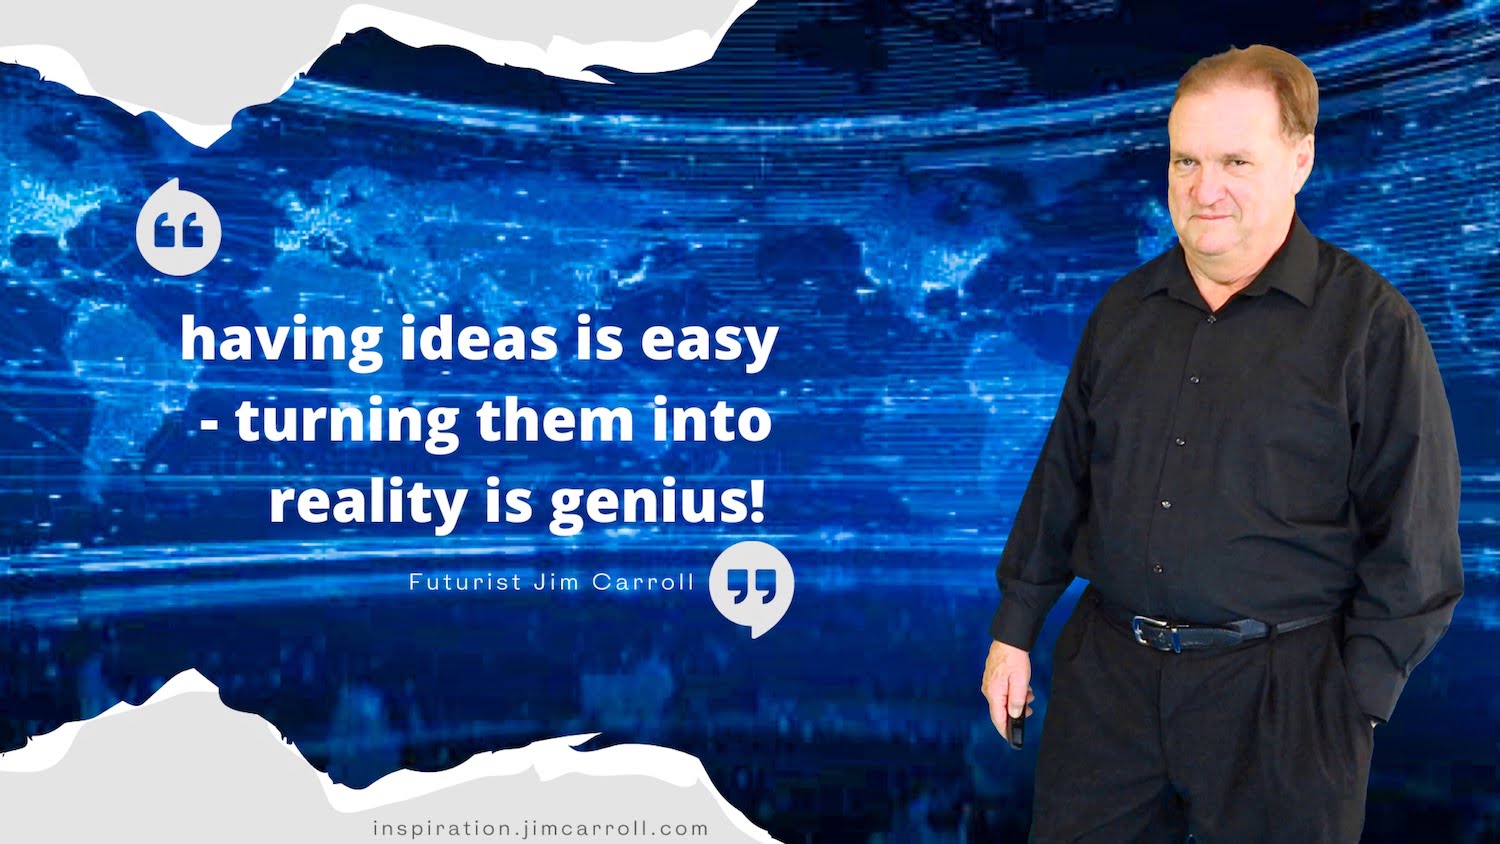 Daily Inspiration: "Having ideas is easy - turning them into reality is genius!"